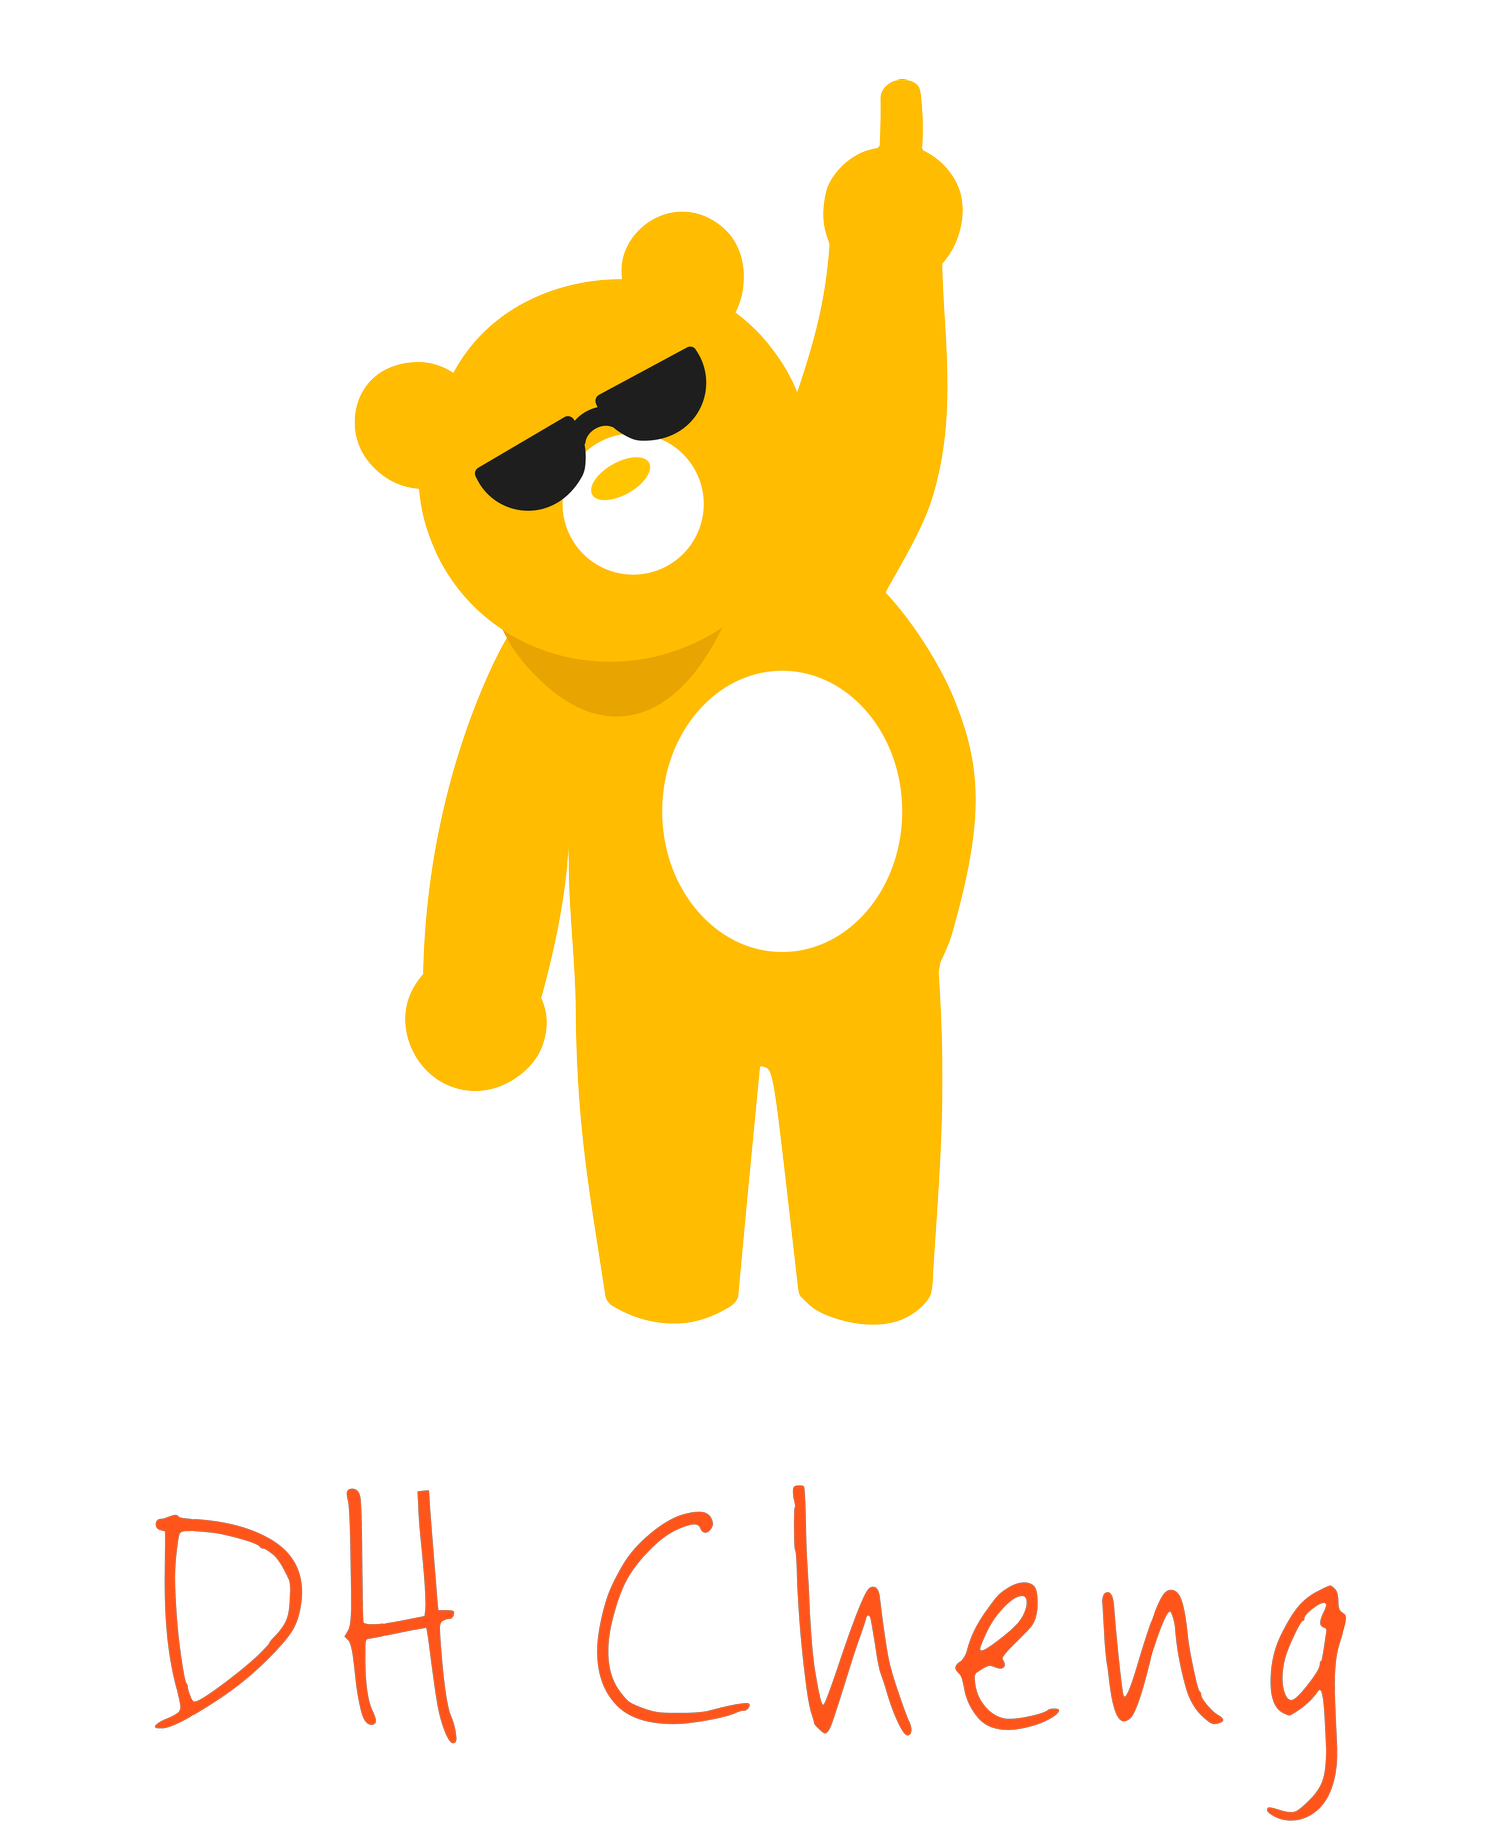 the dh cheng